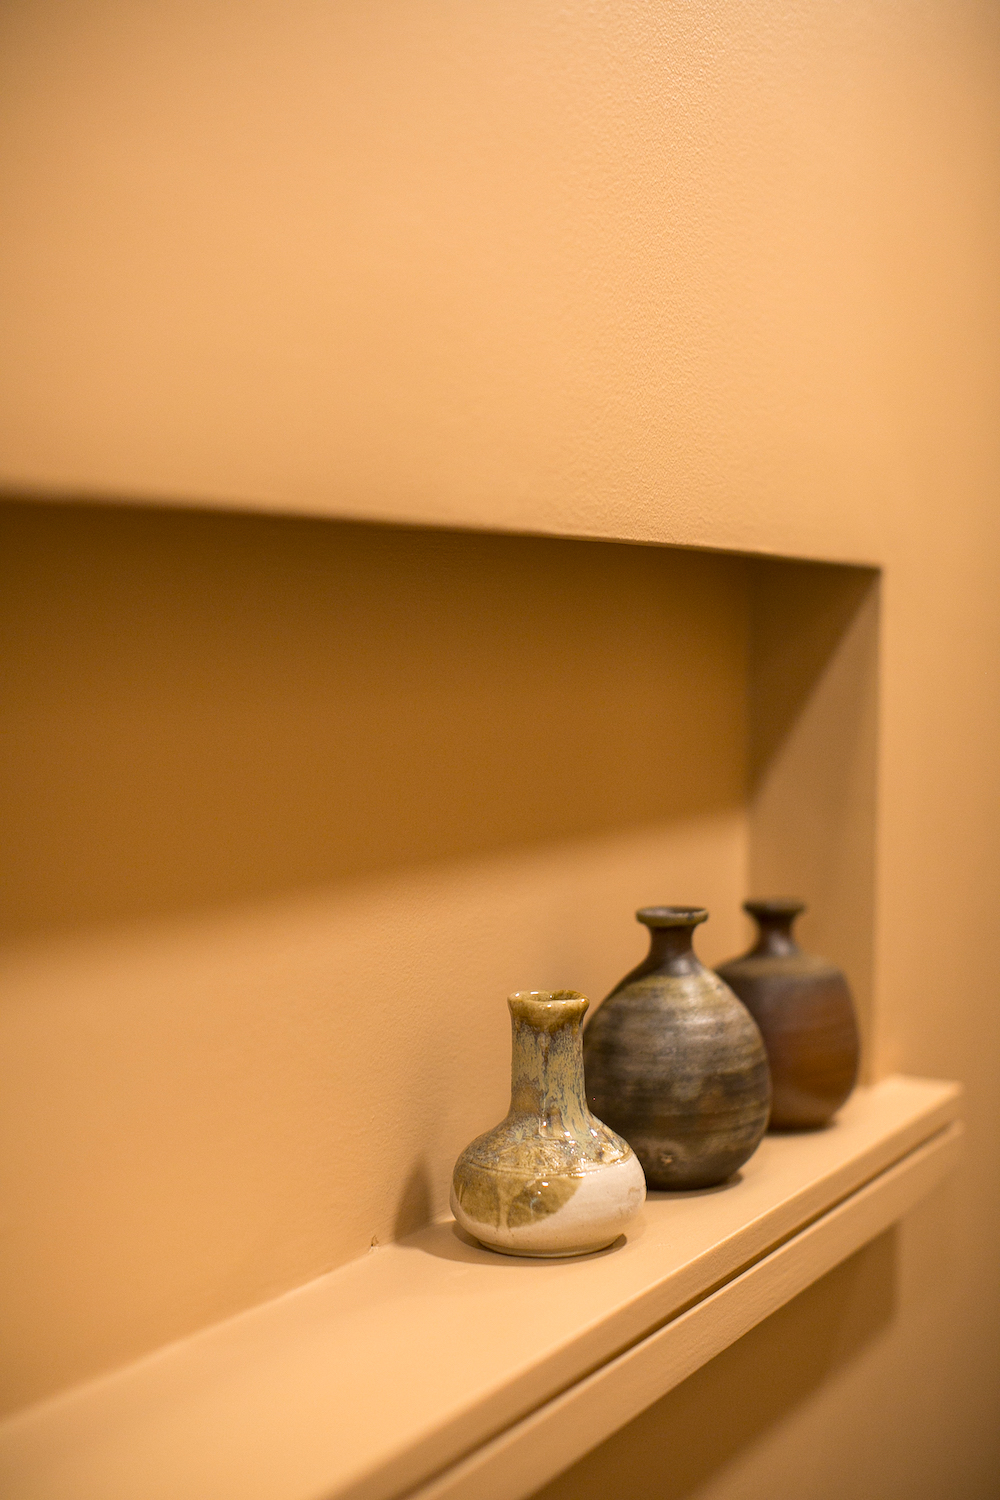 The space is quite a showcase for design details such as pottery from Cornerstone Pottery